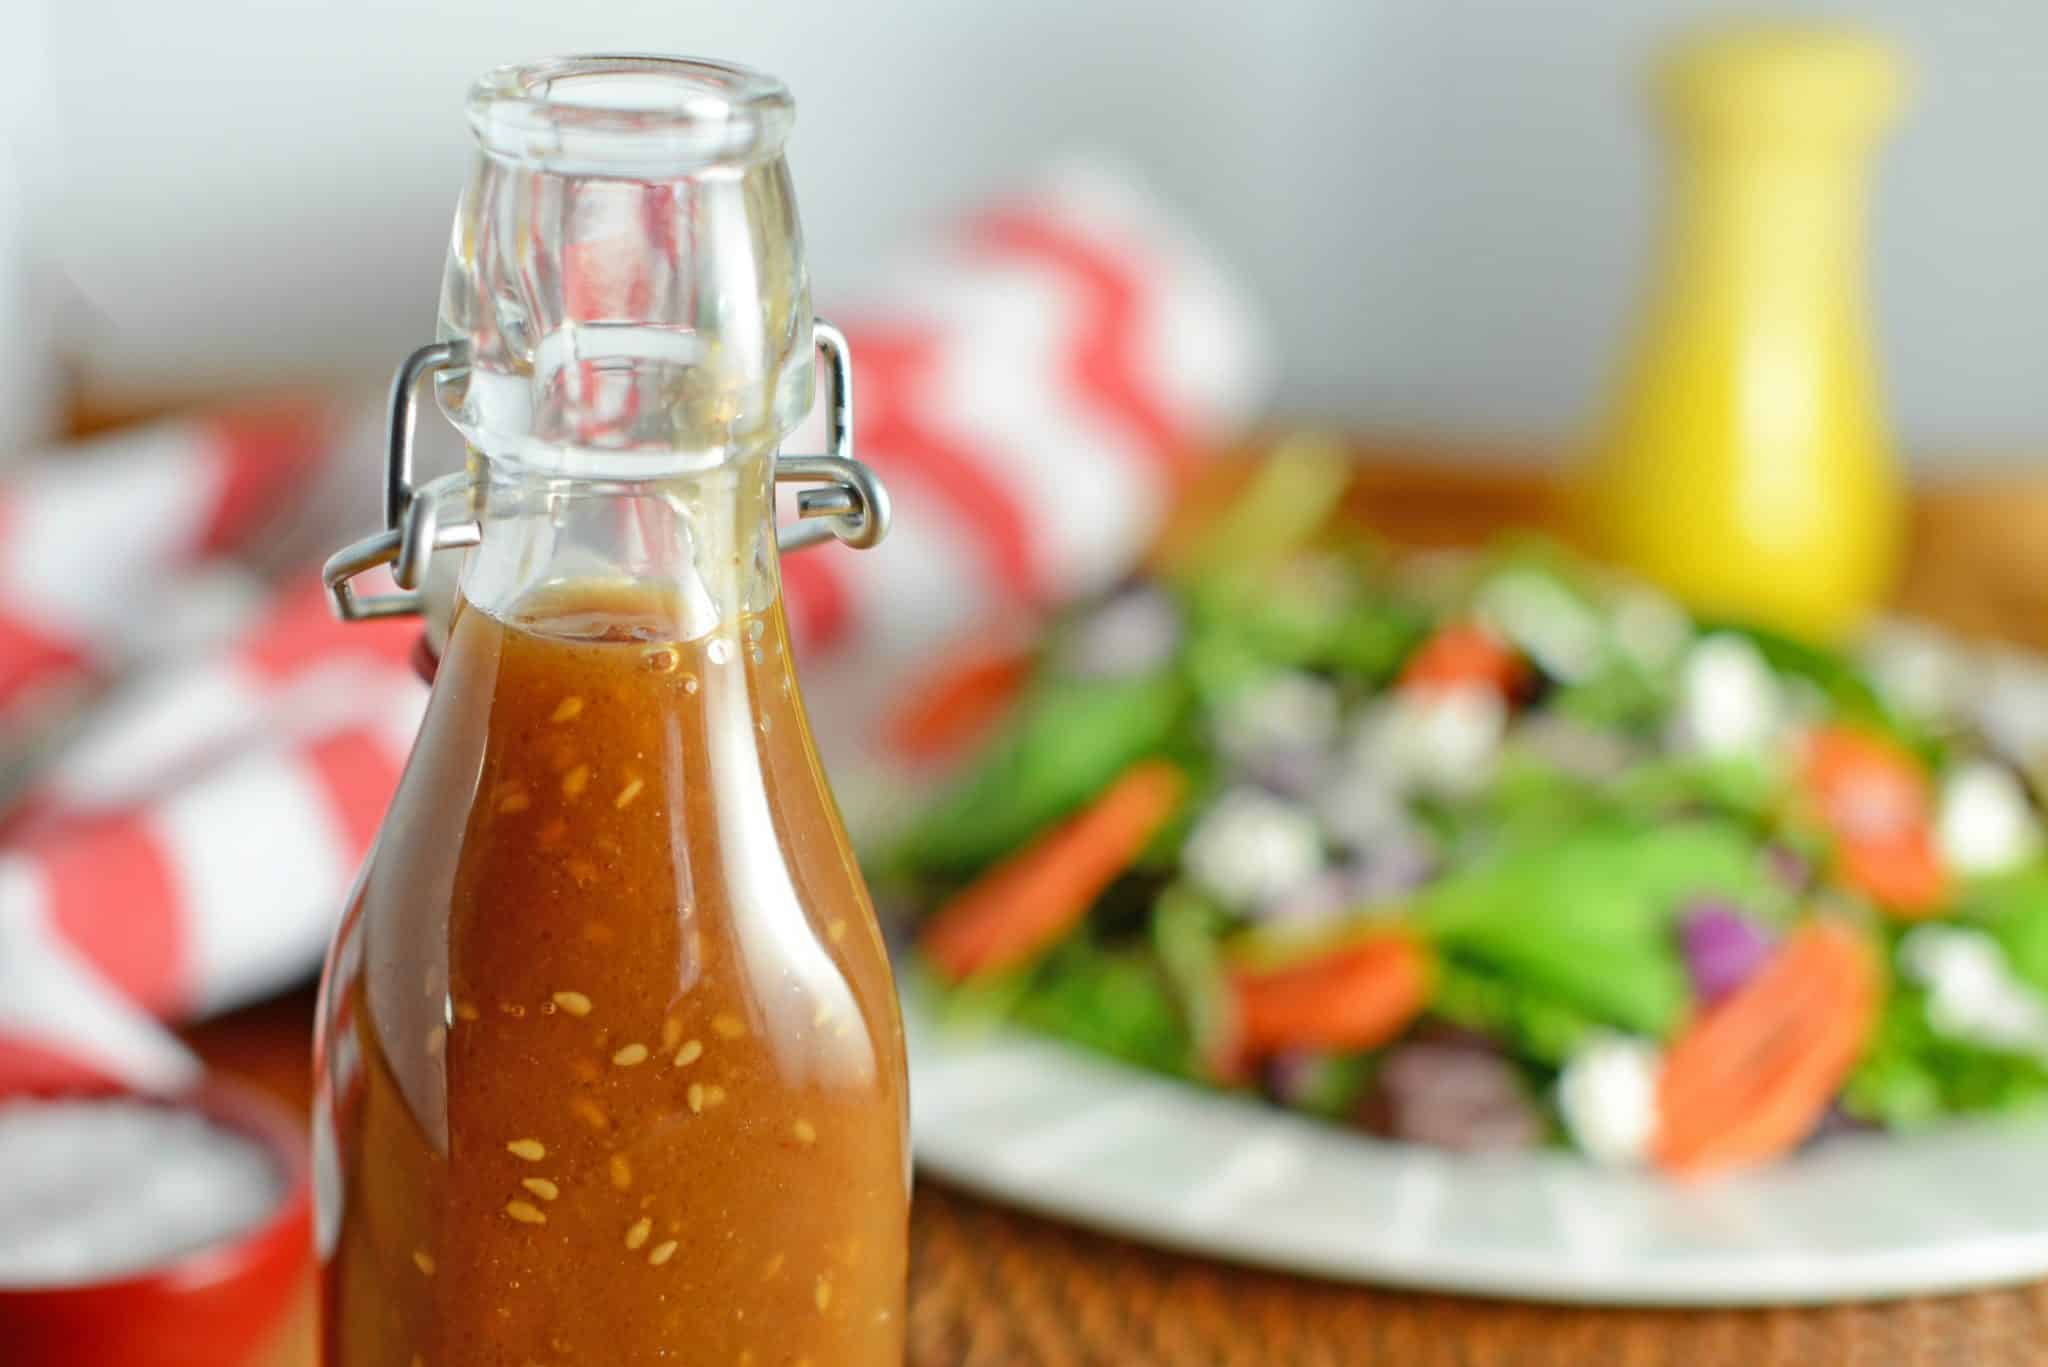 This Asian Salad Dressing is a great copycat recipe for what you get at Japanese steakhouses like Benihana or Kobe! It's a sweet ginger and sesame combination! #asiansaladdressing #gingersaladdressing #japanesesaladdressing www.savoryexperiments.com